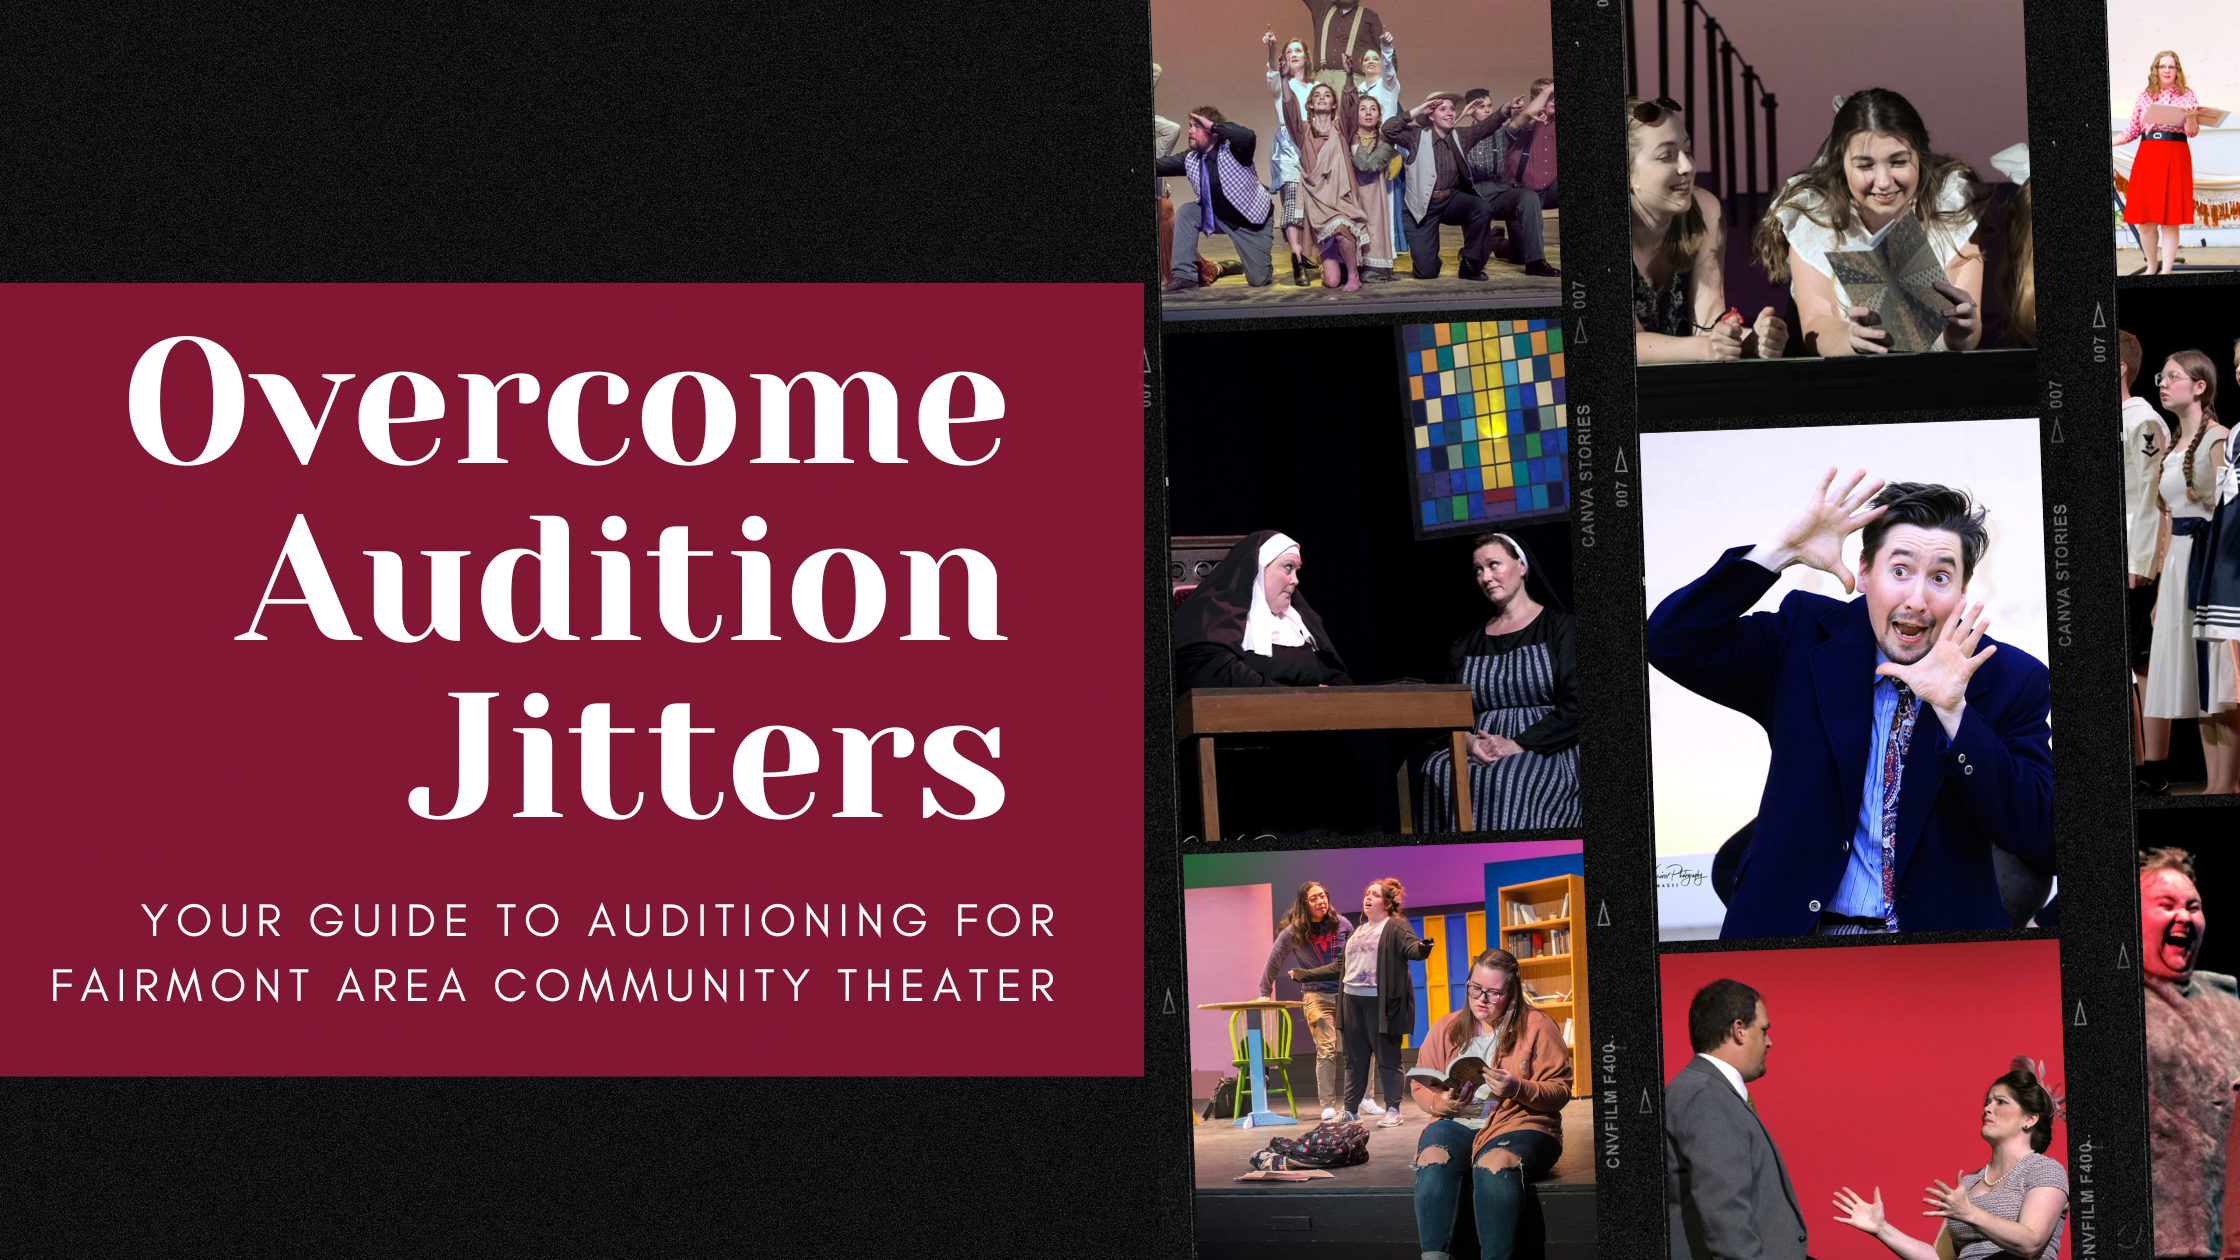 Overcoming Audition Jitters: Your Guide to Auditioning for Fairmont Area Community Theater
